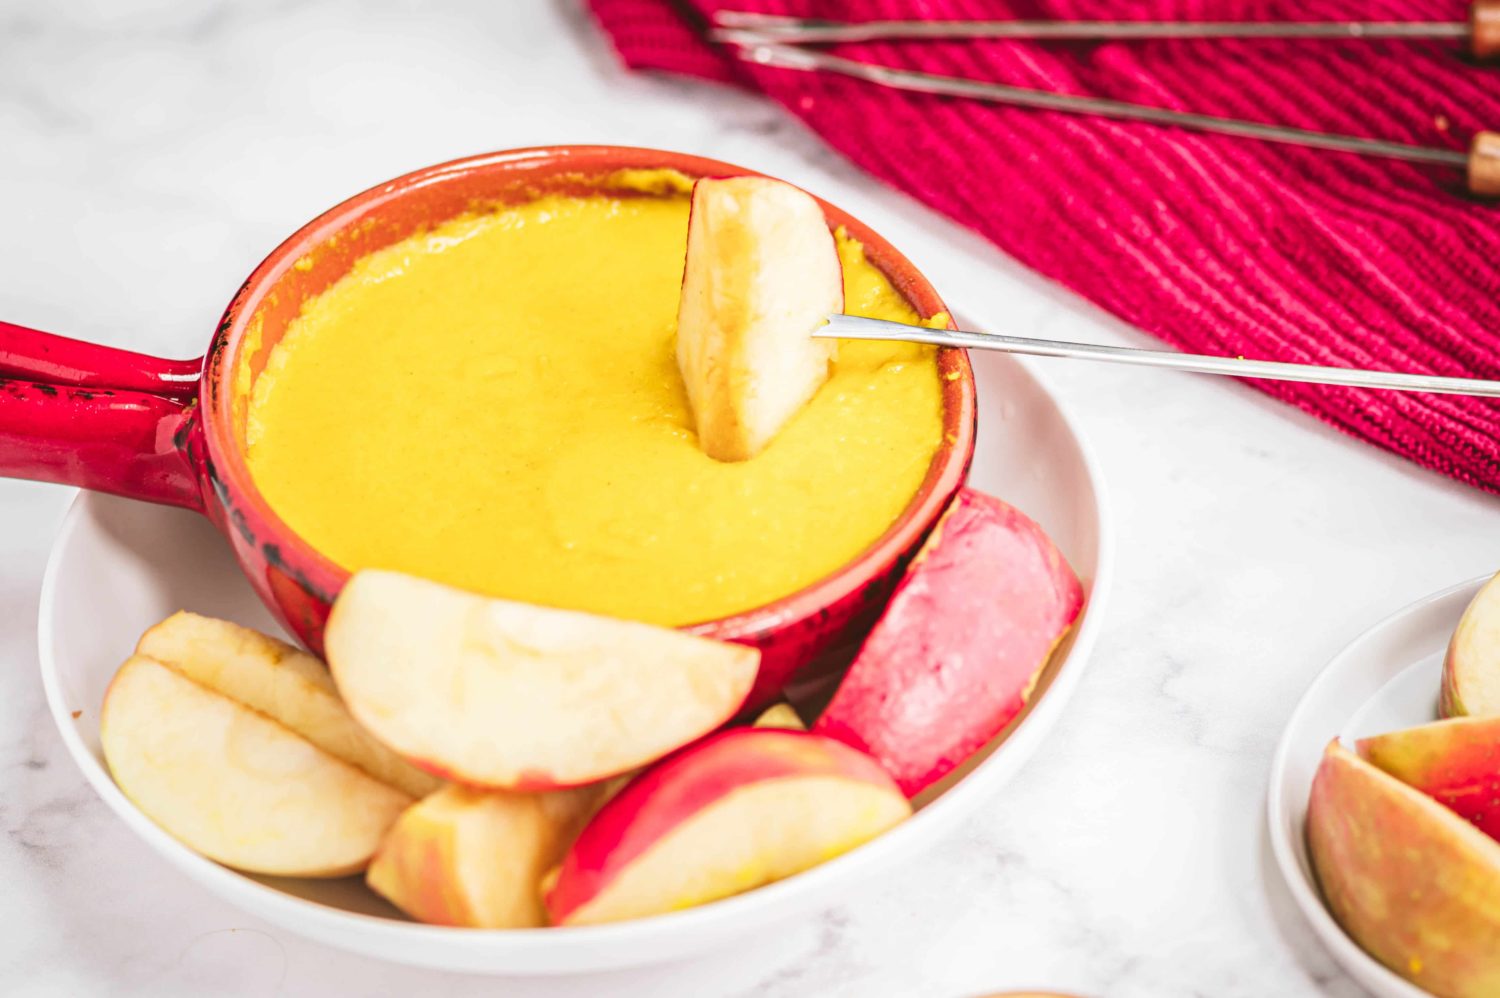 a bowl of fondue cheese that is bright yellow with an apple being dipped in